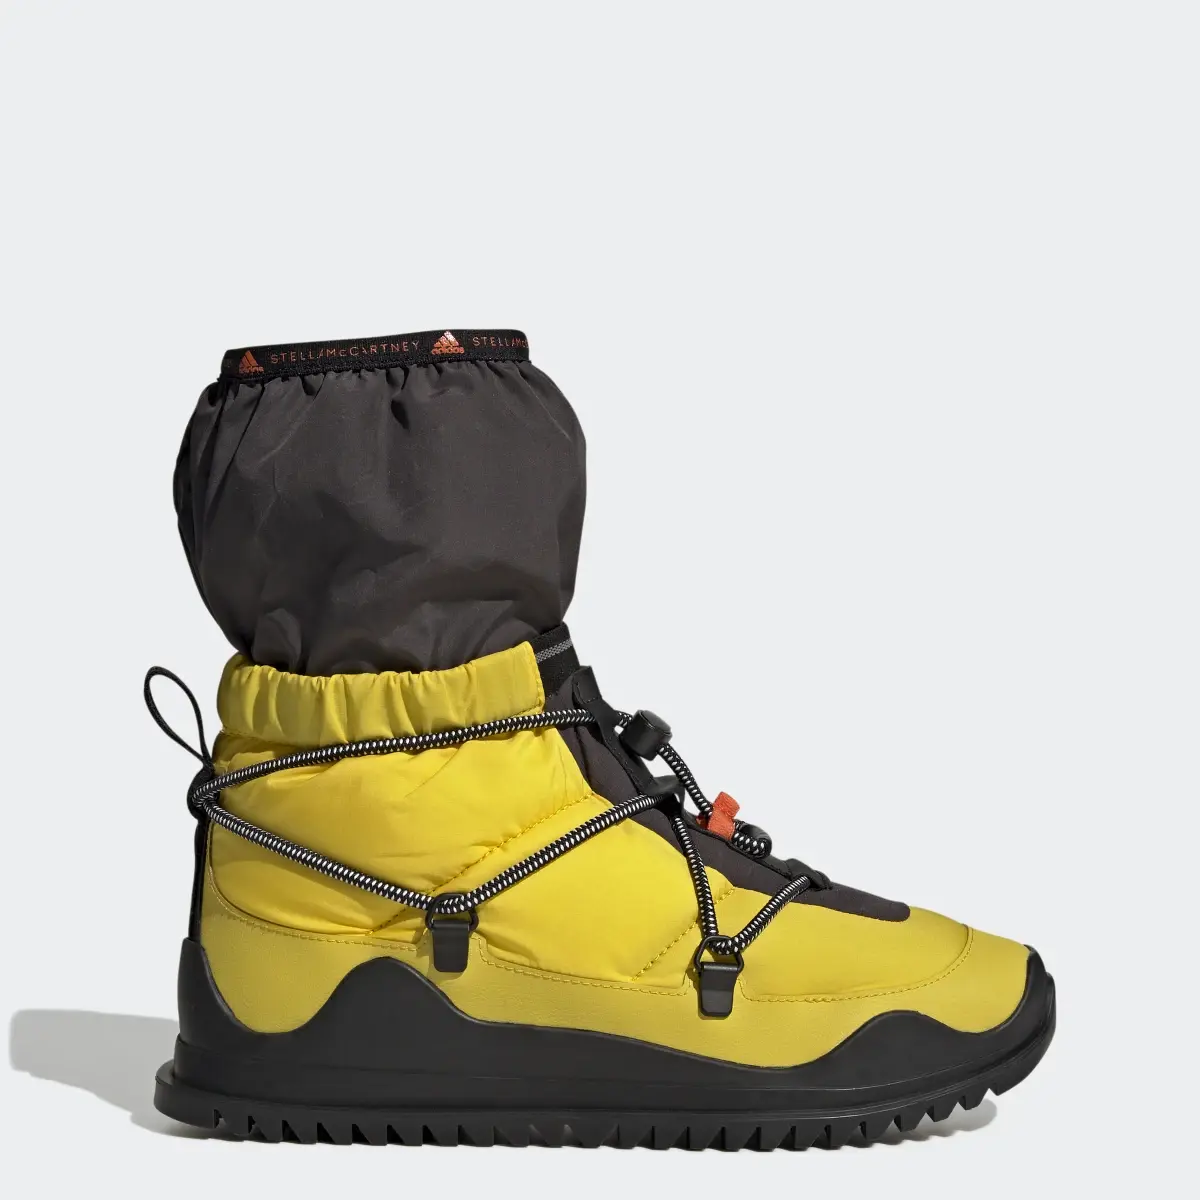 Adidas by Stella McCartney Winter COLD.RDY Boot. 1